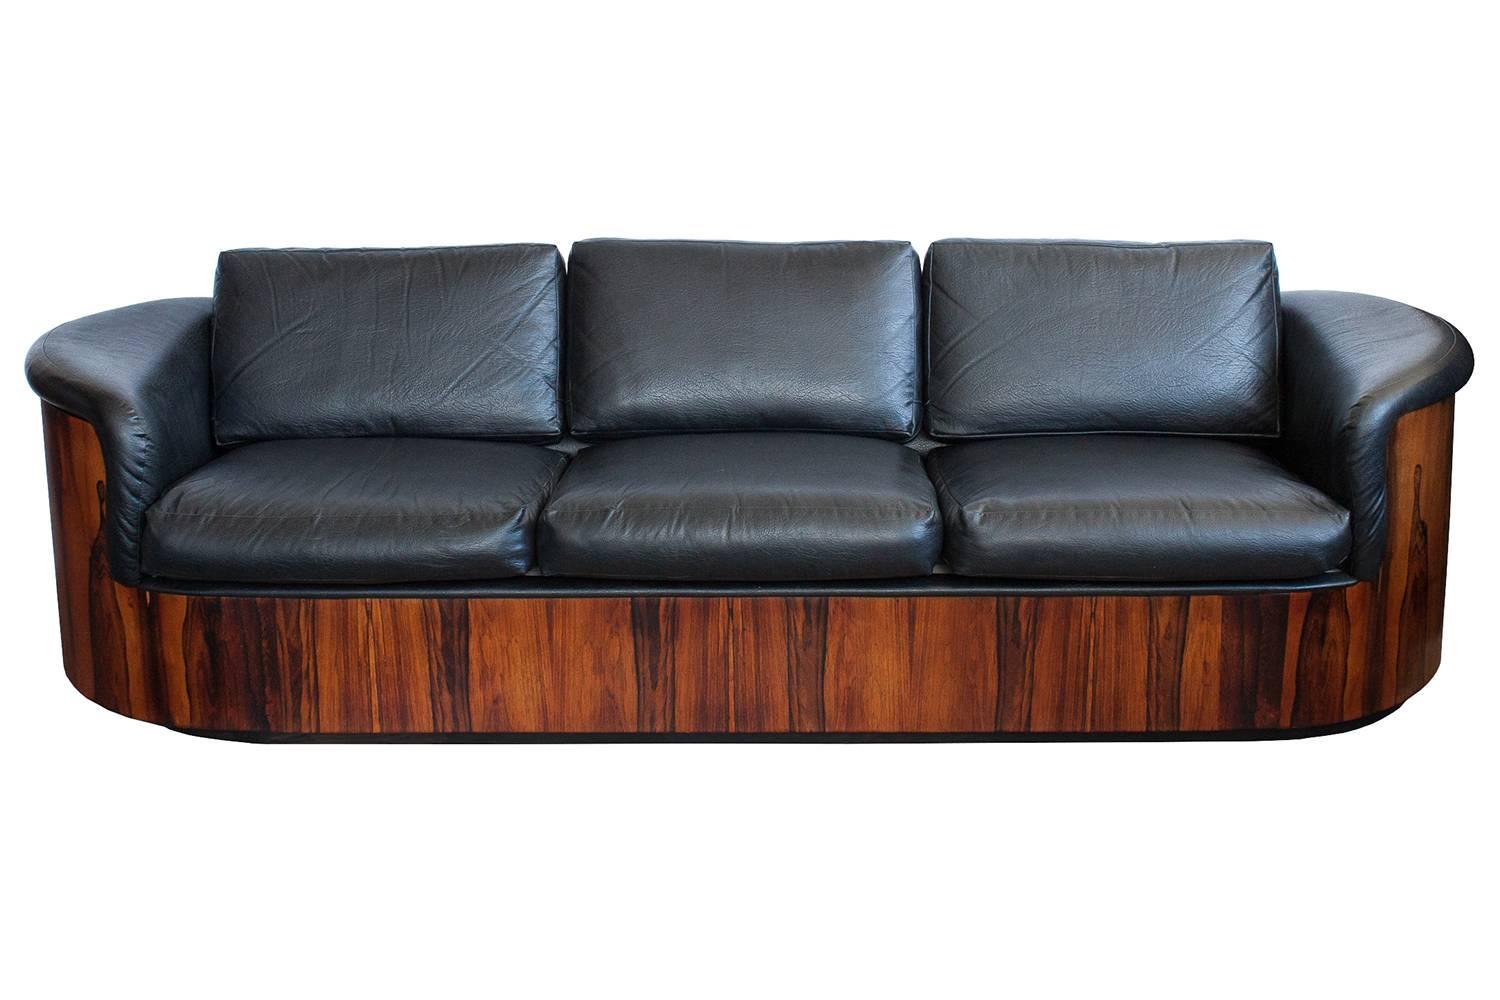 Rare rosewood sofa by Plycraft. A seldom seen design by Plycraft, one of the pioneers of moulded plywood furniture in America. Nicely figured grained rosewood and original black naugahyde upholstery. Unique racetrack/pill shaped moulded plywood